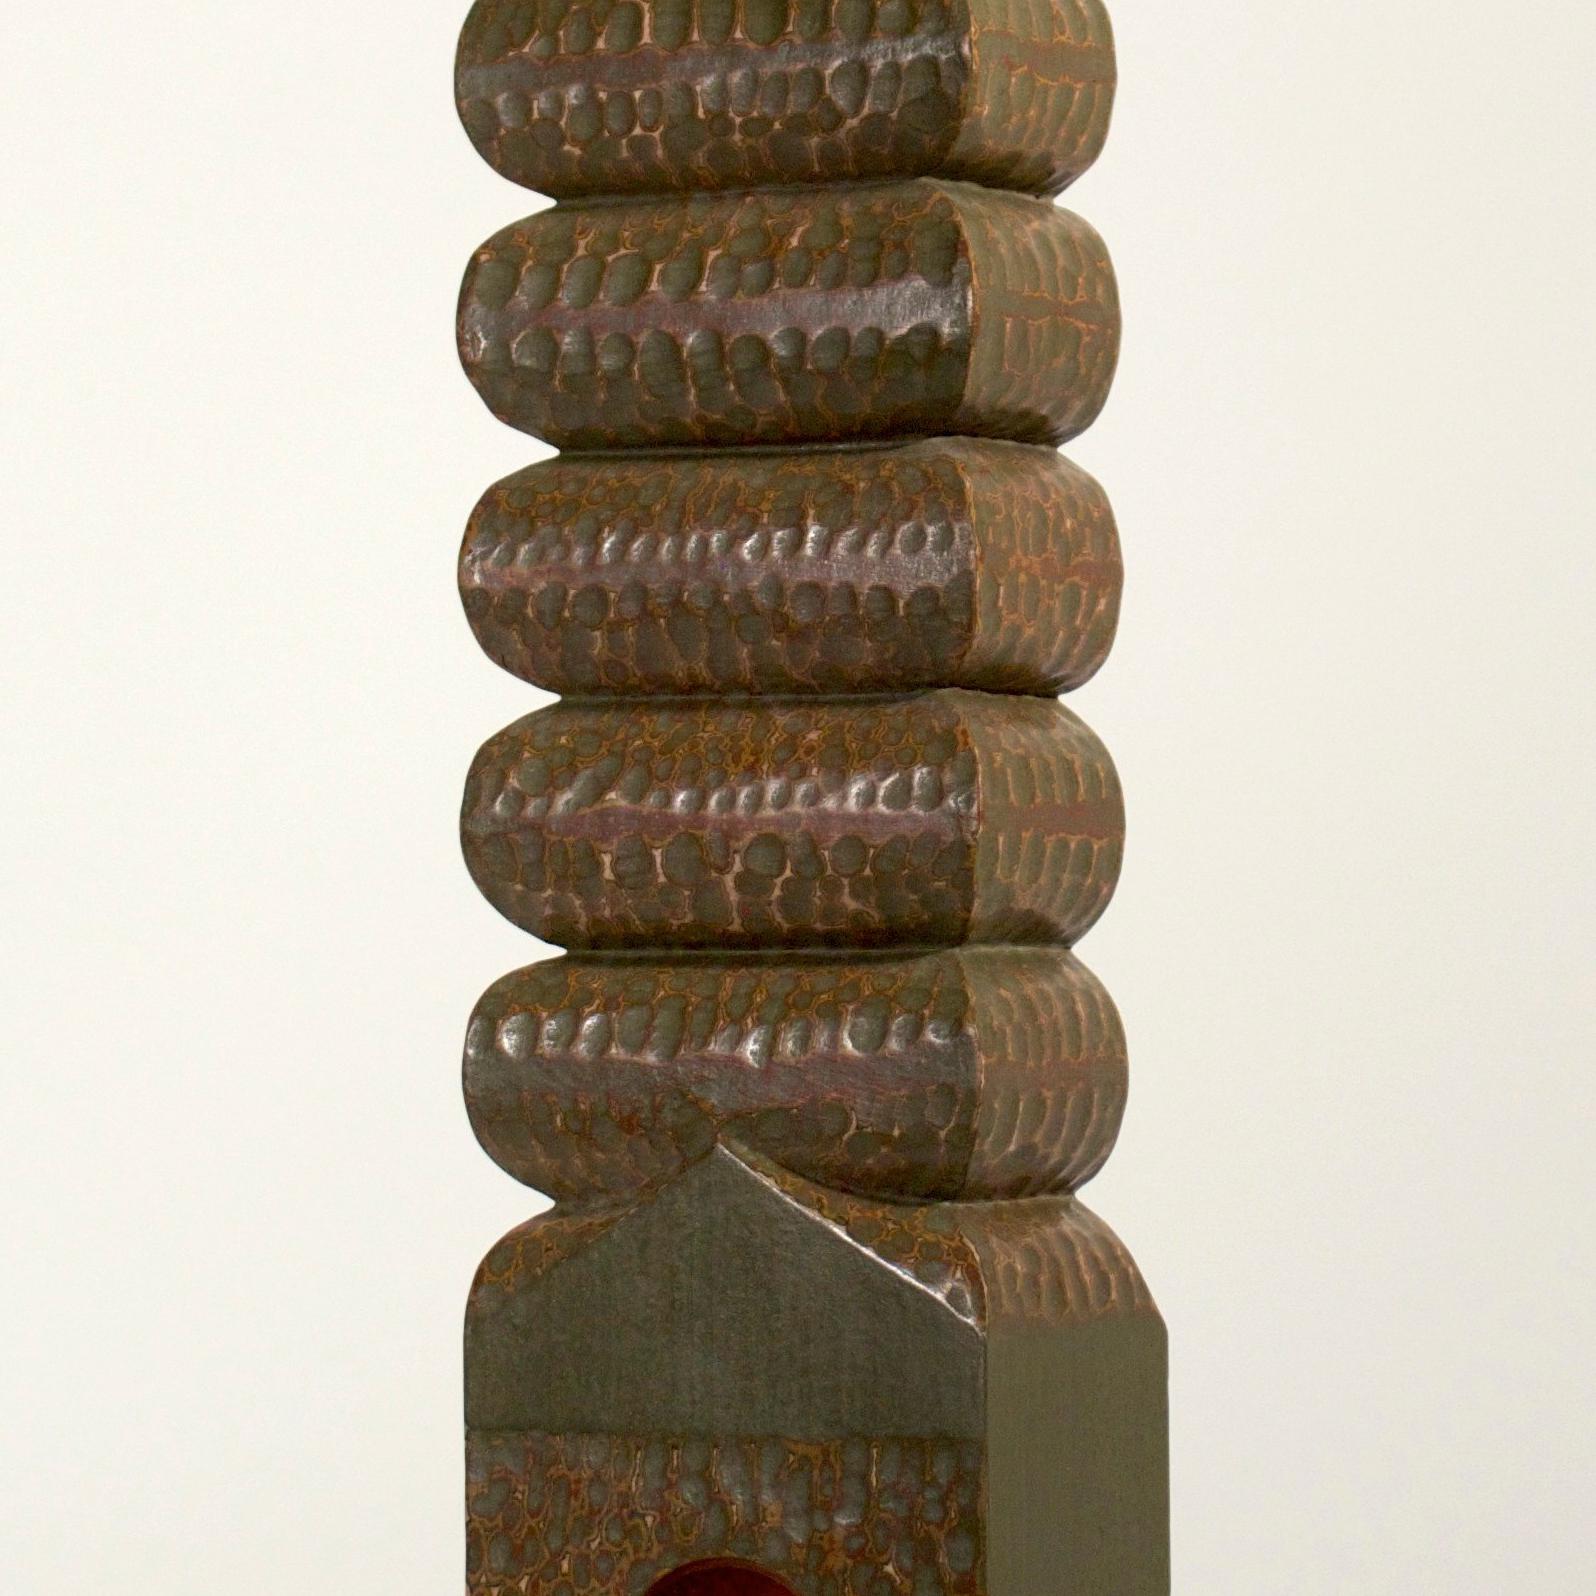 Philip Shore uses his art to illustrate man's relationship to the environment and how the connection between nature and culture is becoming more fractured. Spiraling Dreams is made of wood, cast iron, cast aluminum, silicone, fern frond, casein